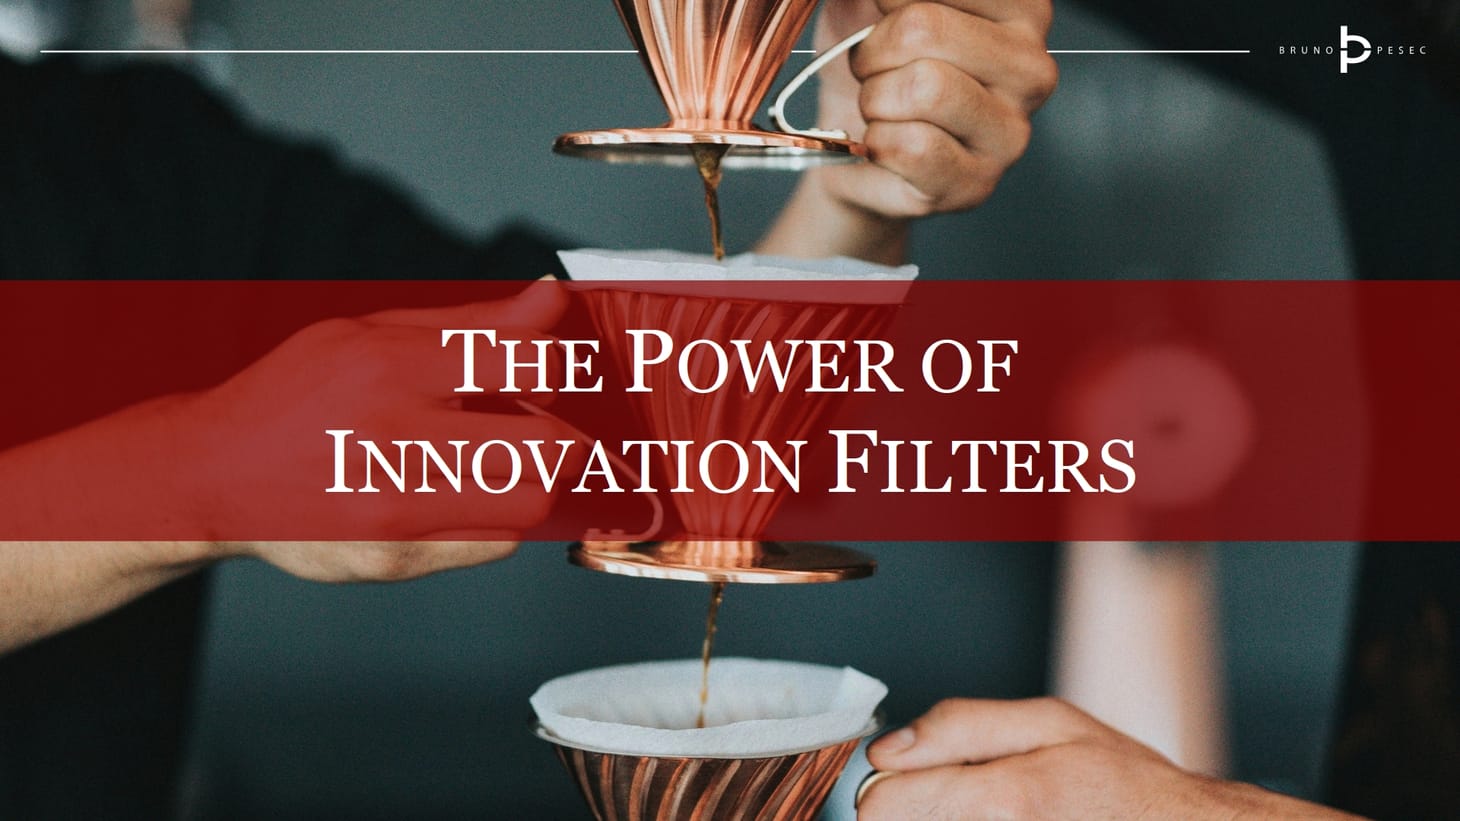 The power of innovation filters